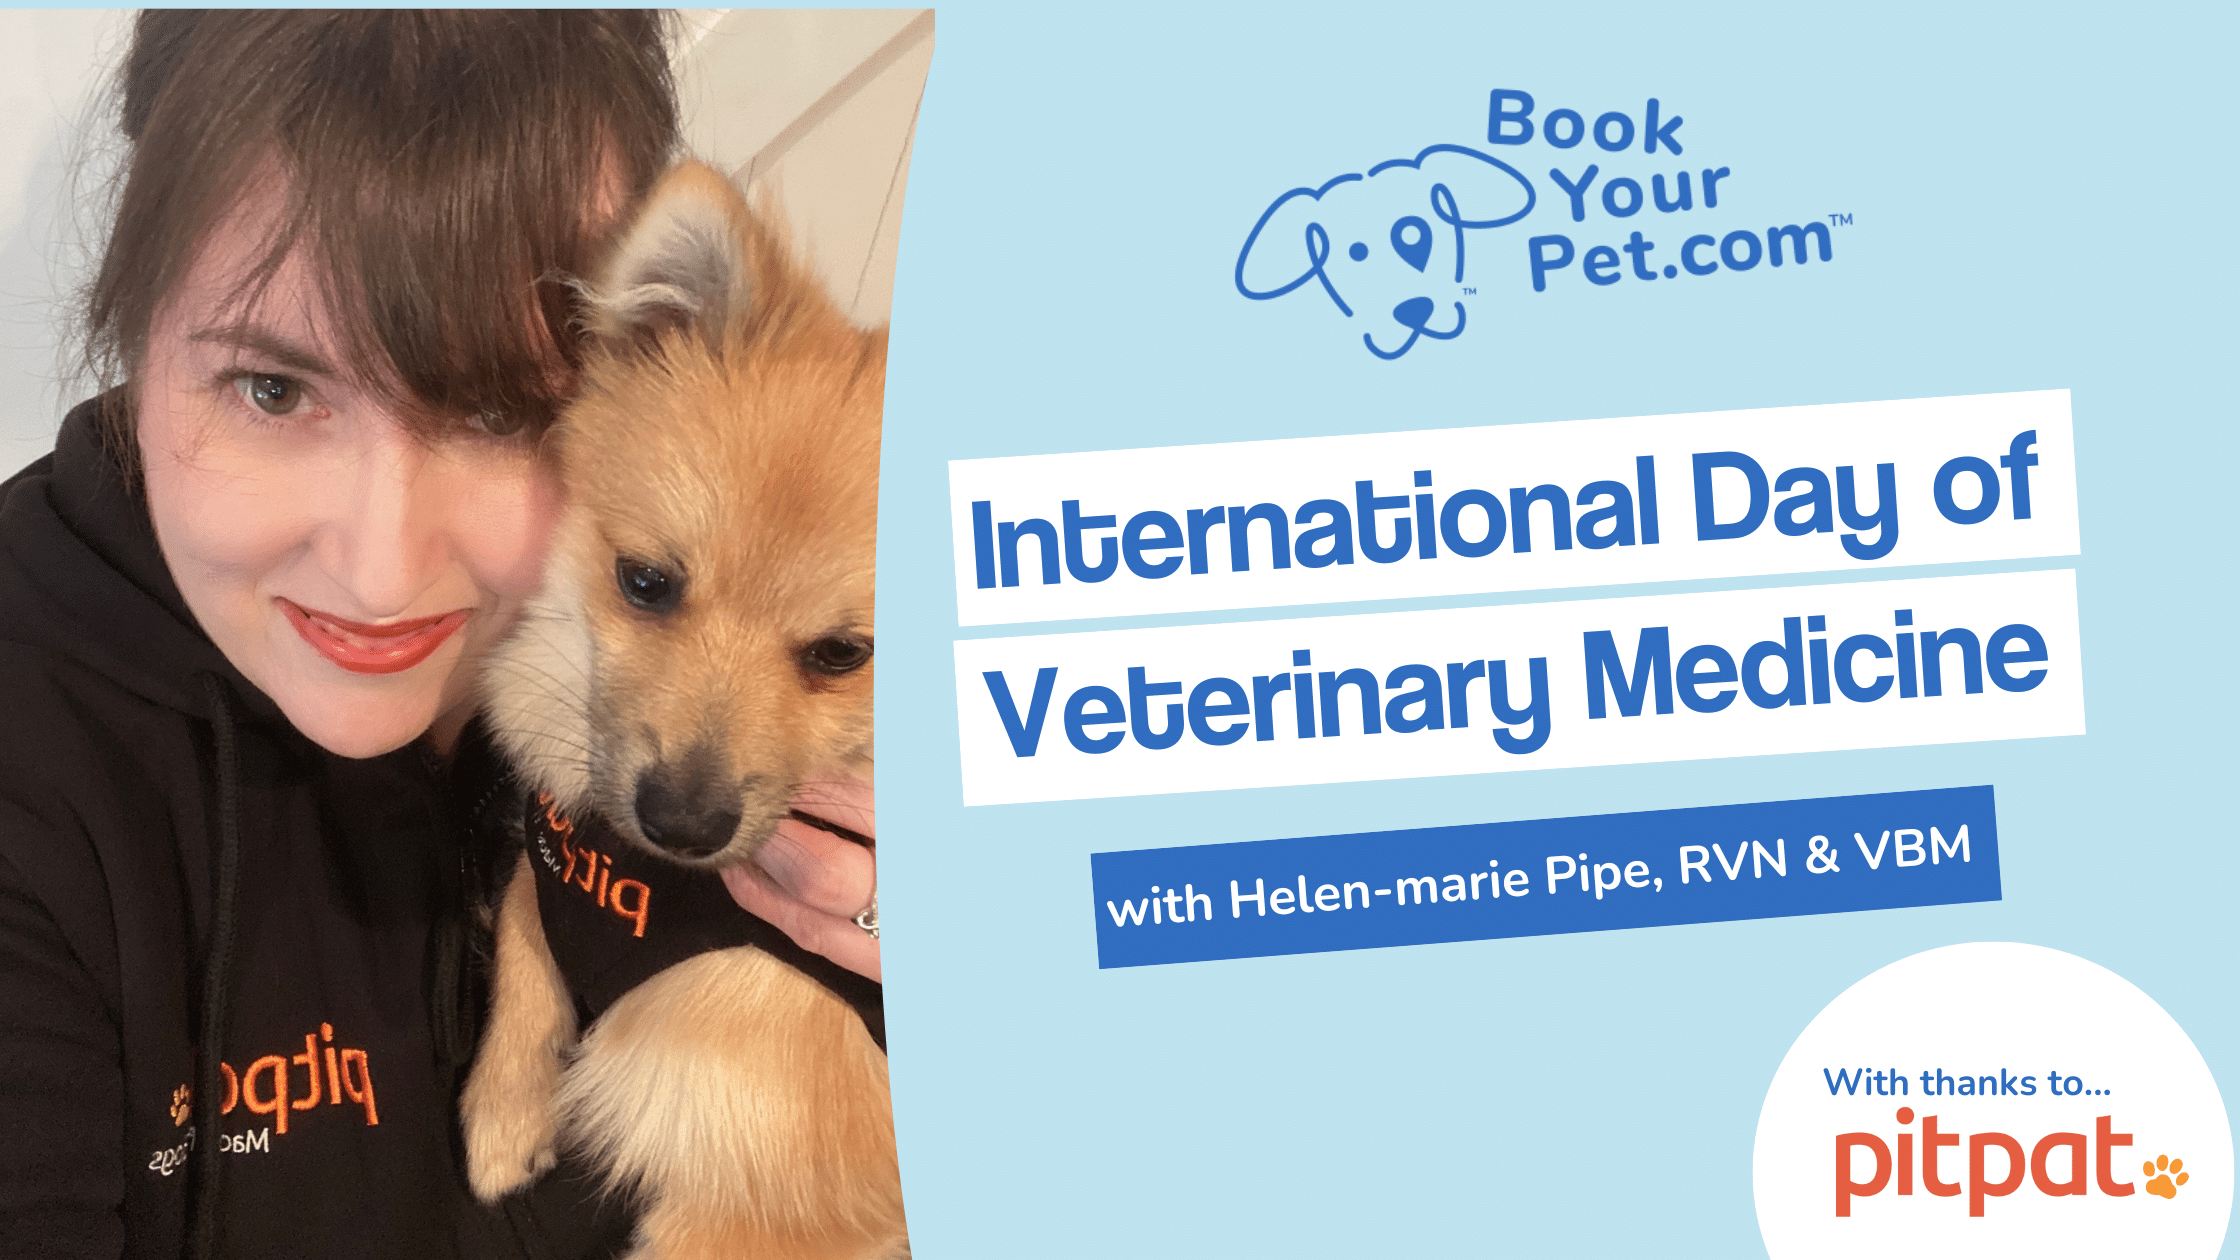 On the left of the image is pictured Helen-Marie Pipe, Royal Veterinary Nurse and Veterinary Business manager for PitPat pet. It is a close up, selfie image of her cuddling her pomeranian dog. On the right of the image is the text 'International Day of Veterinary Medicine with Helen-Marie Pip RVN & VBM, with thanks to PitPat.'